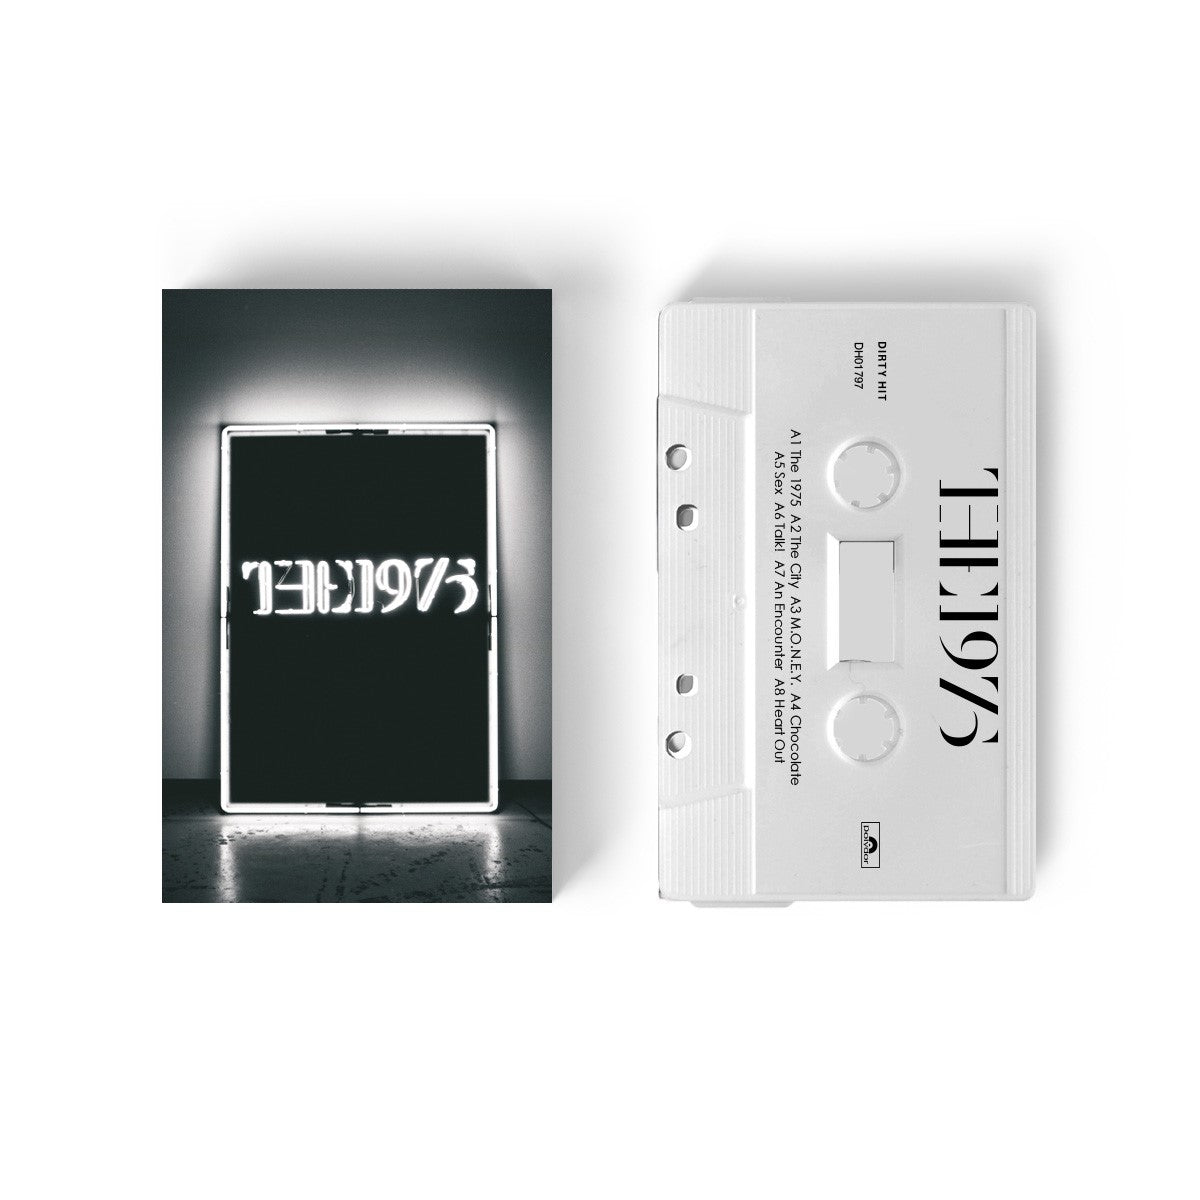 The 1975 (10th Anniversary Edition): Limited Edition Cassette, 2CD + 10YR T-Shirt Bundle